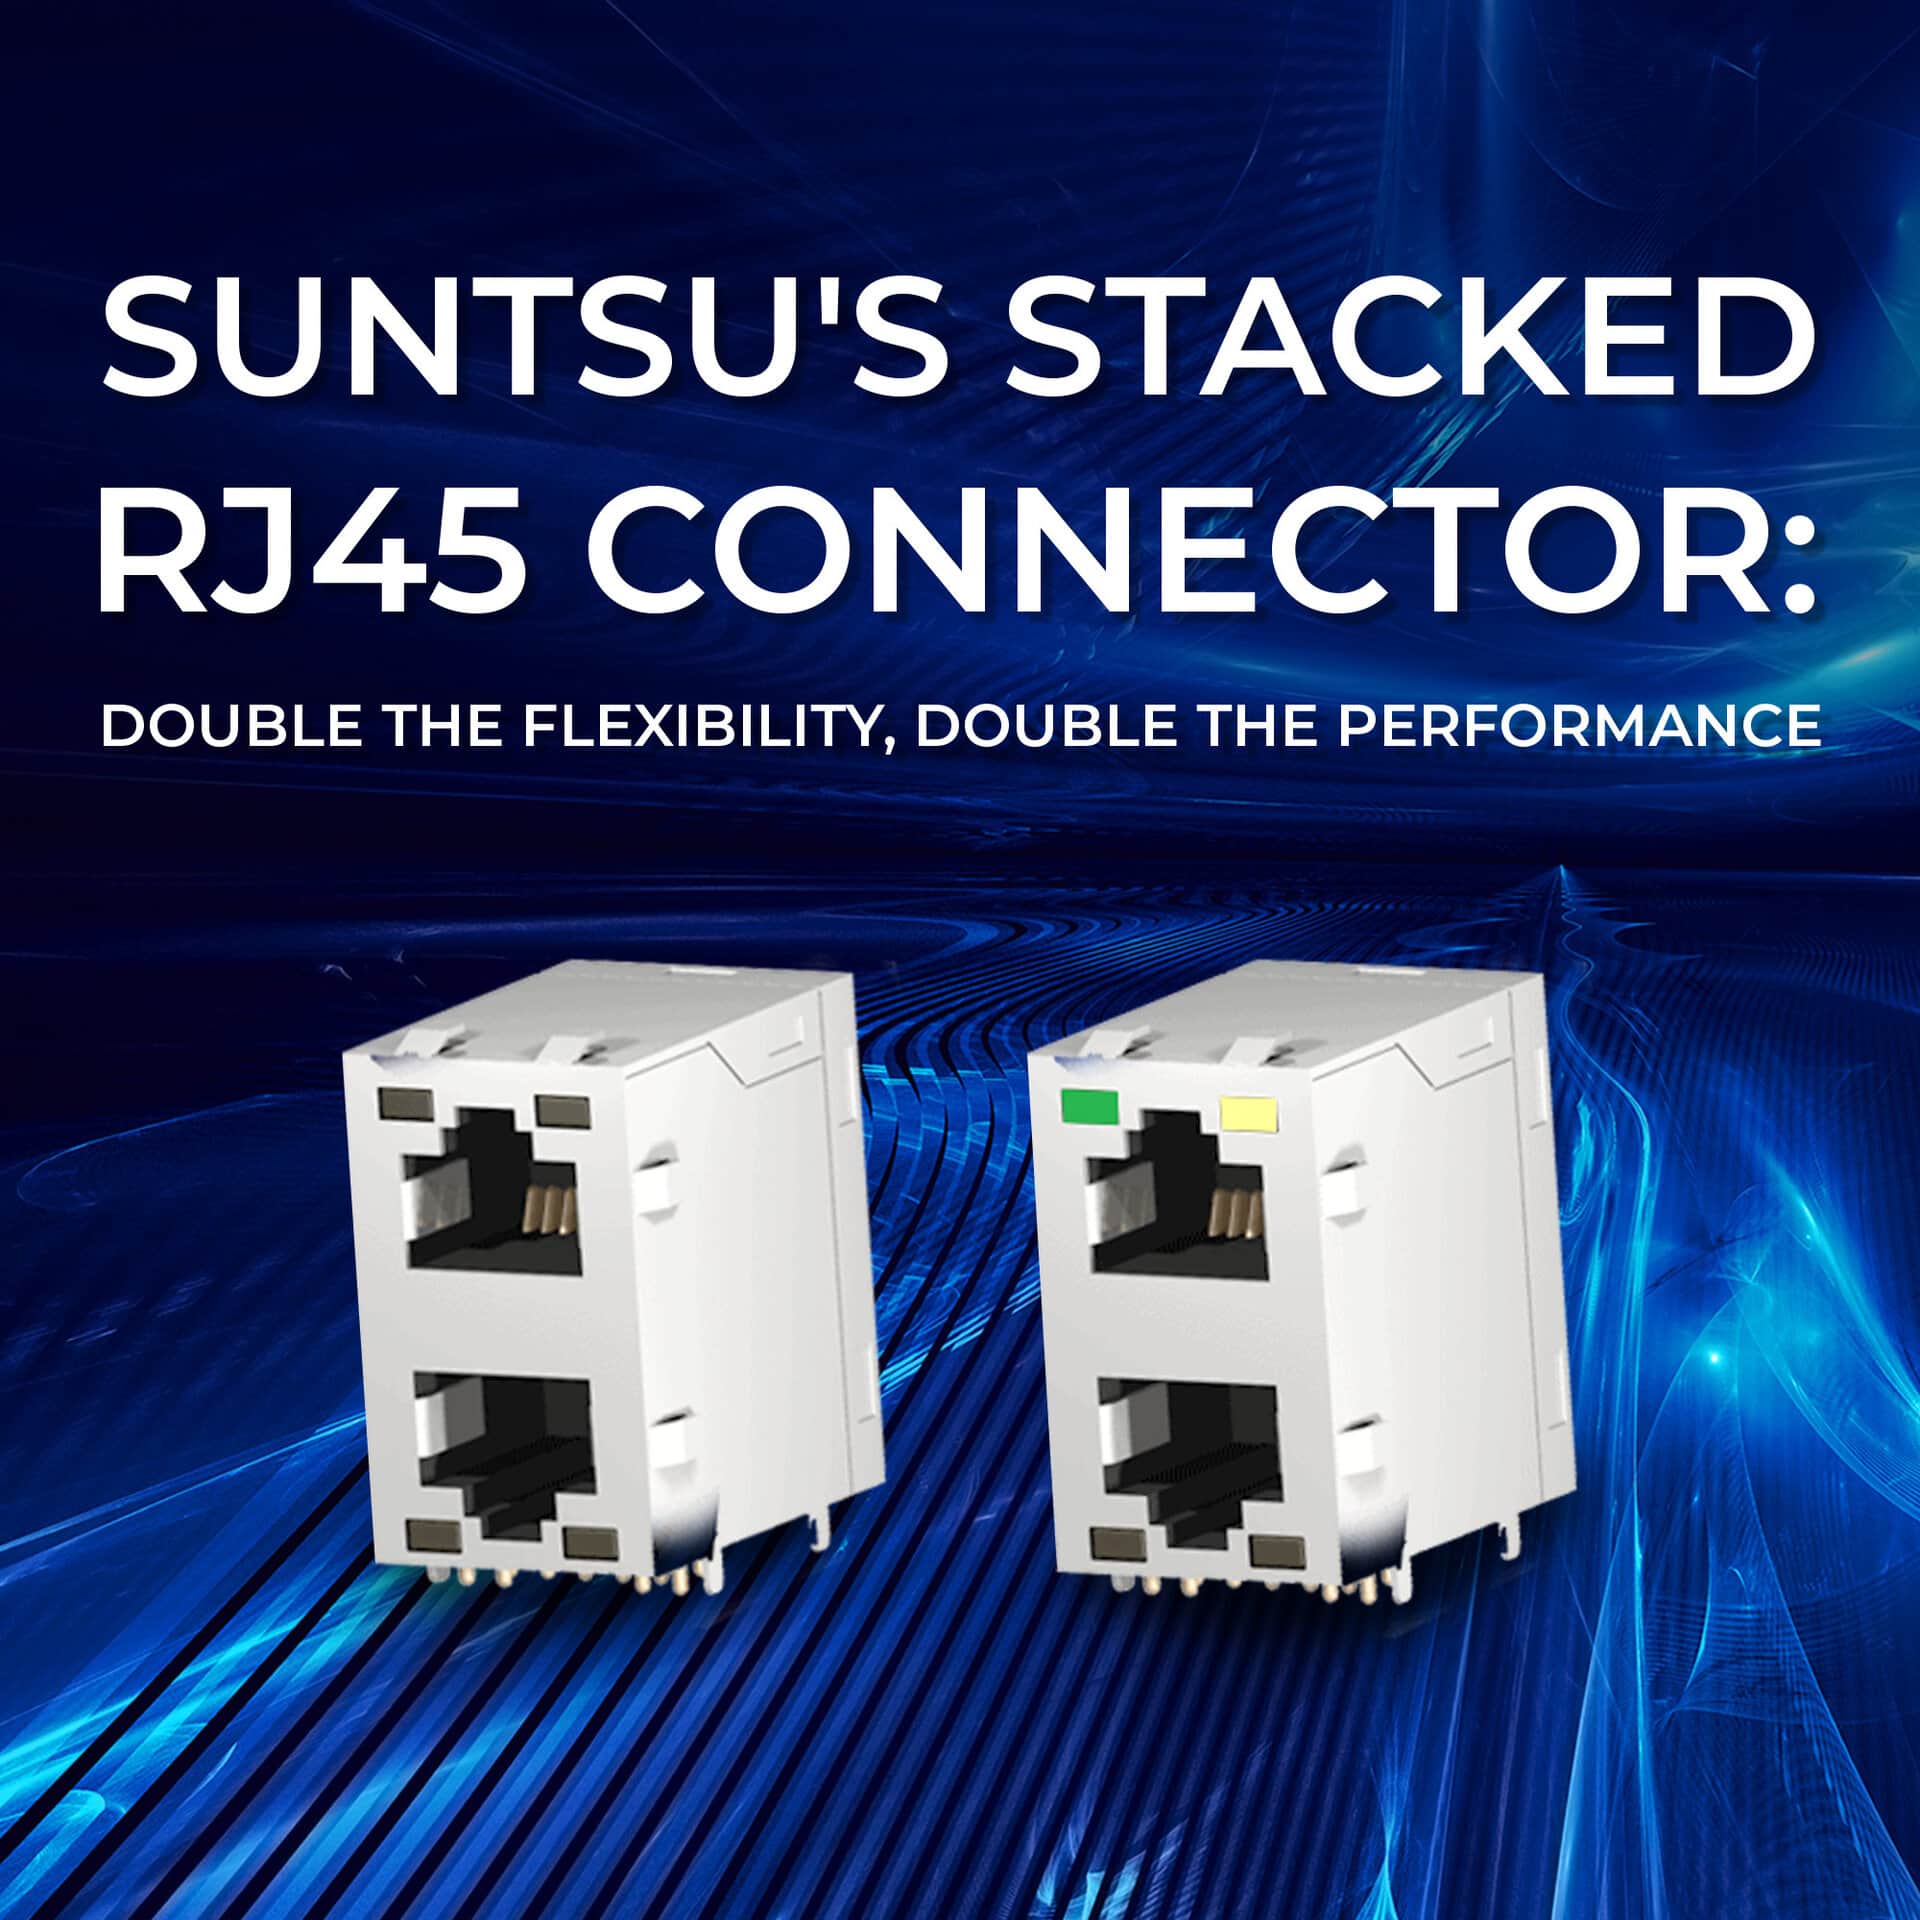 Suntsu's Stacked RJ45 Connector: Double the Flexibility, Double the Performance